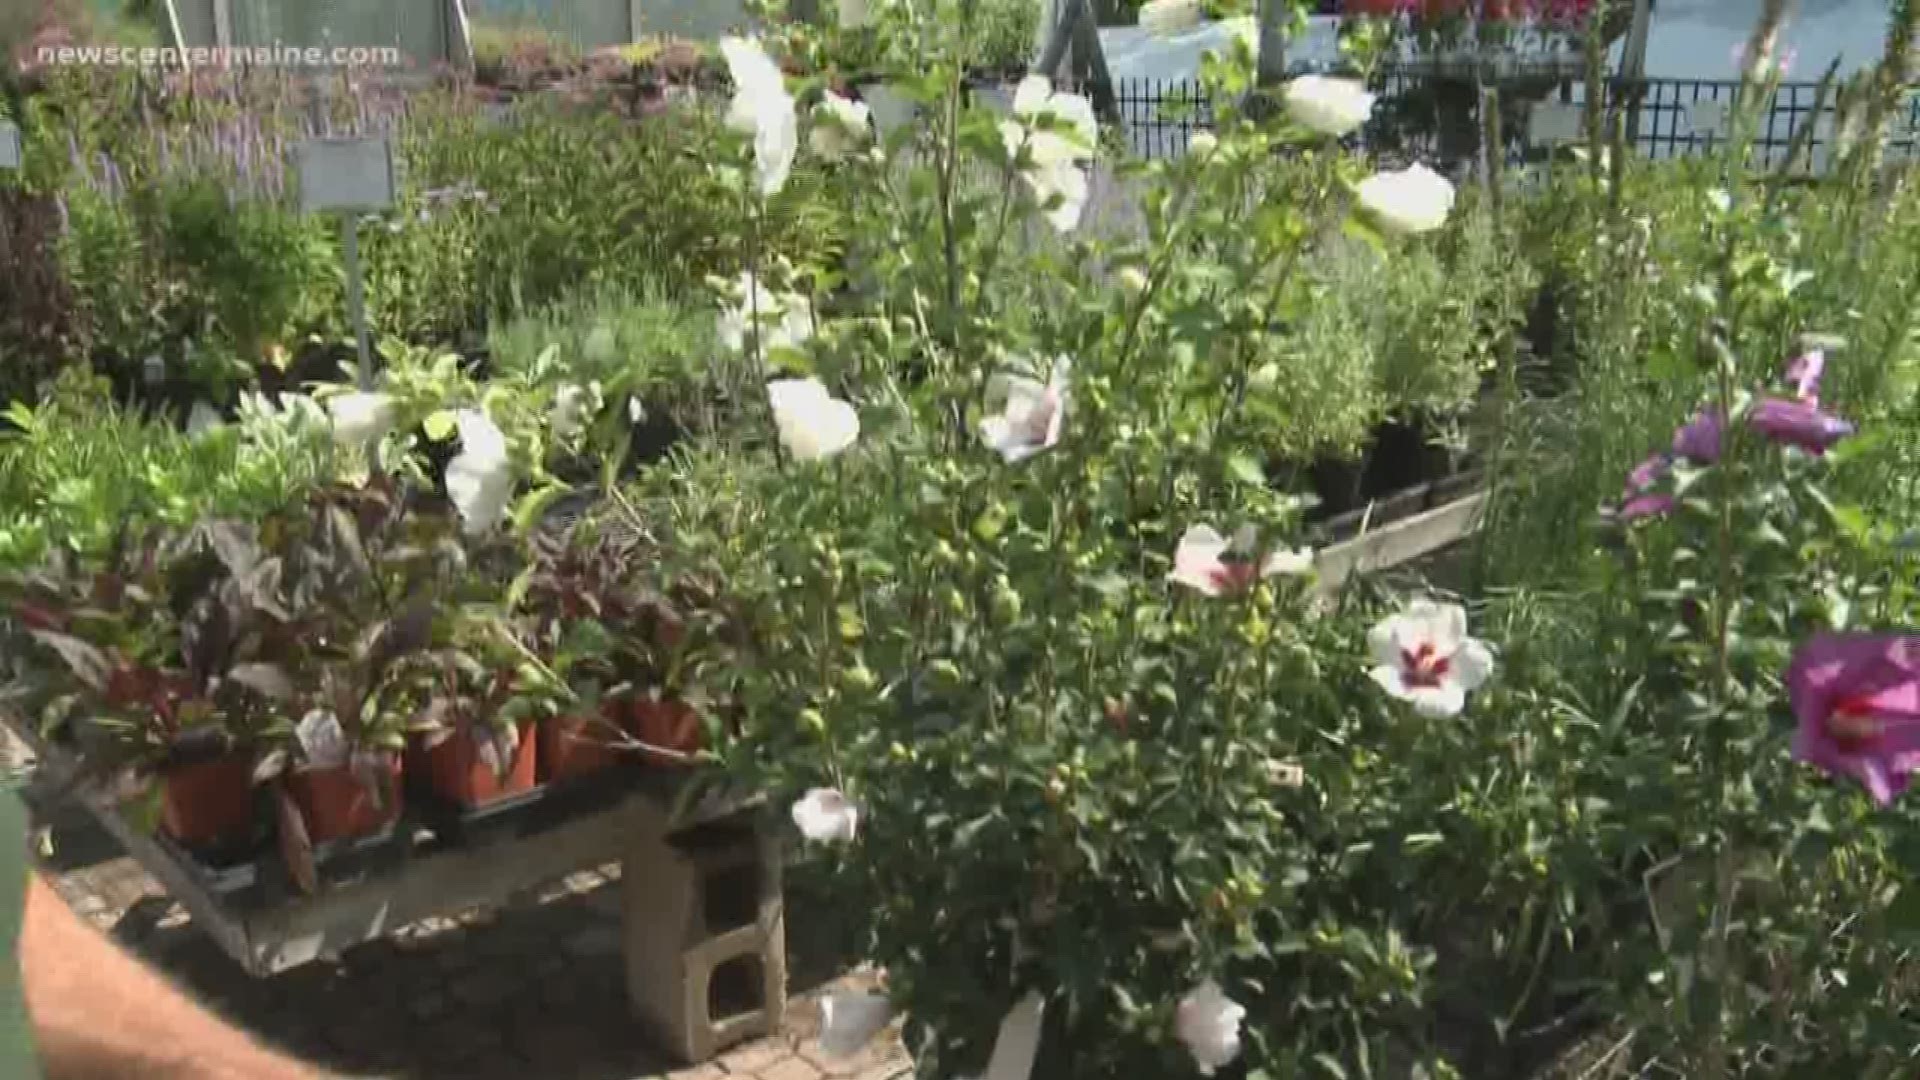 Most people think of Hibiscus as a tropical plant and think it could never grow here.  But it can!  There are varieties that not only tolerate our weather, but thrive in it. Cindy Williams heads to Sillin's Greenhouses in Falmouth to learn more.